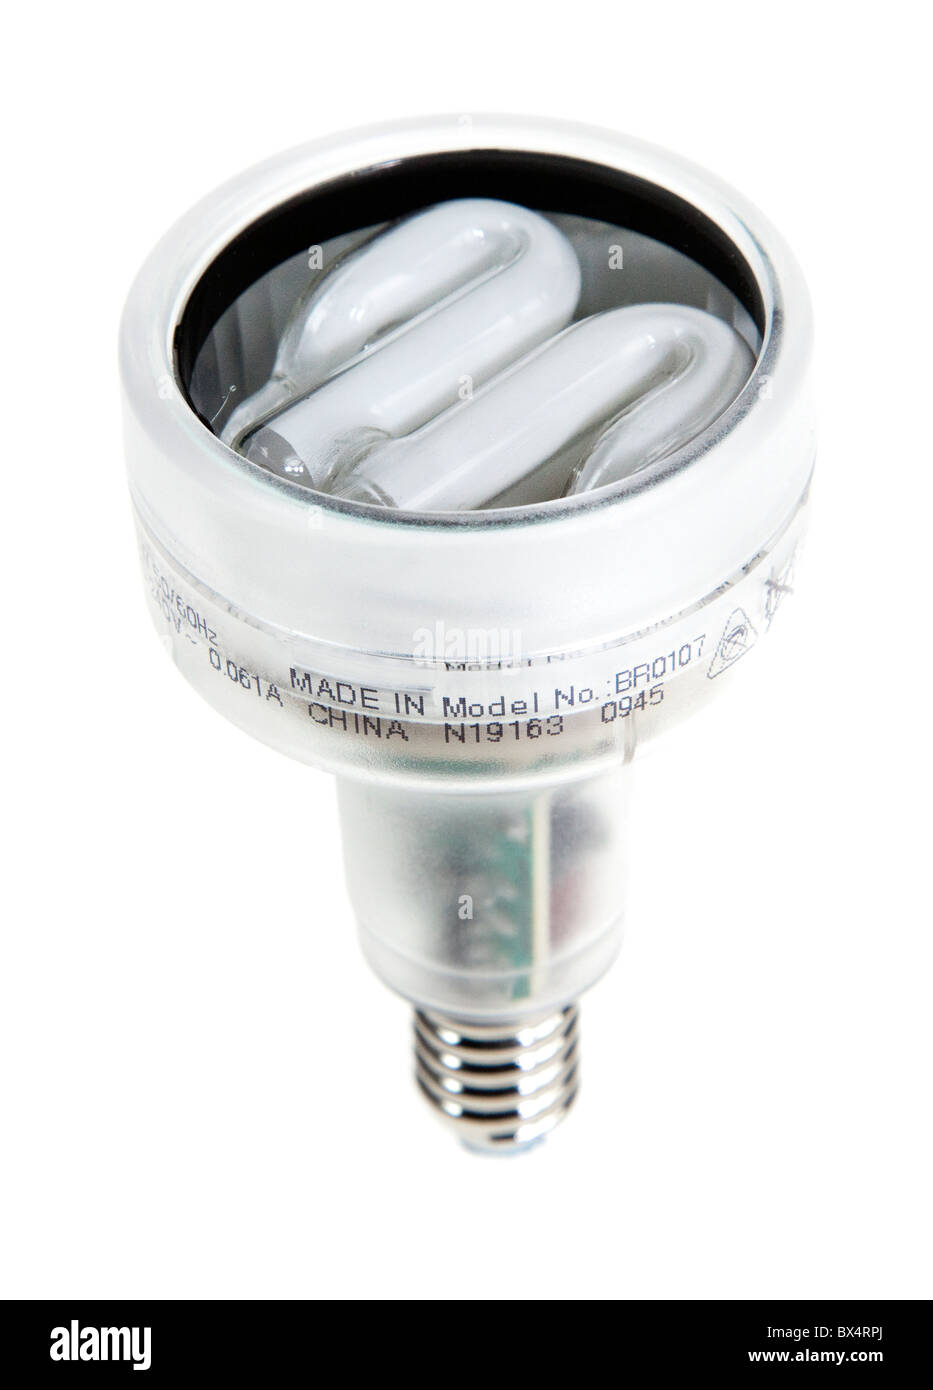 Energy saving miniature SME light bulb made in China and sold in the UK Stock Photo